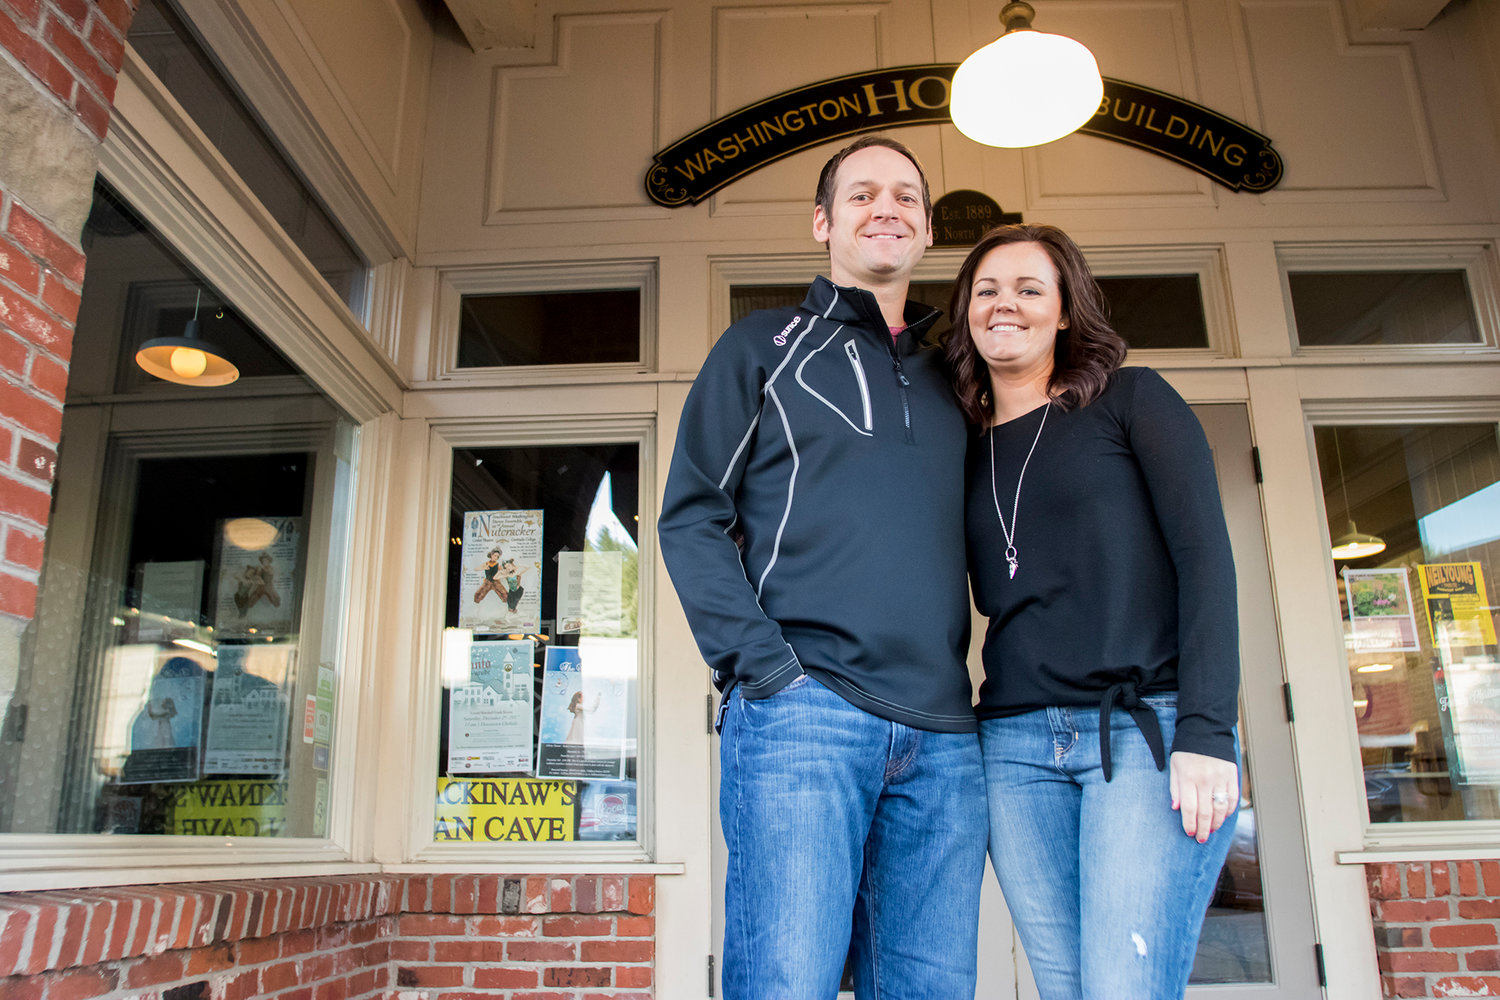 Jason Boettner, left, and his wife Shawna Boettner, right, pose for a photo Wednesday afternoon in downtown Chehalis.